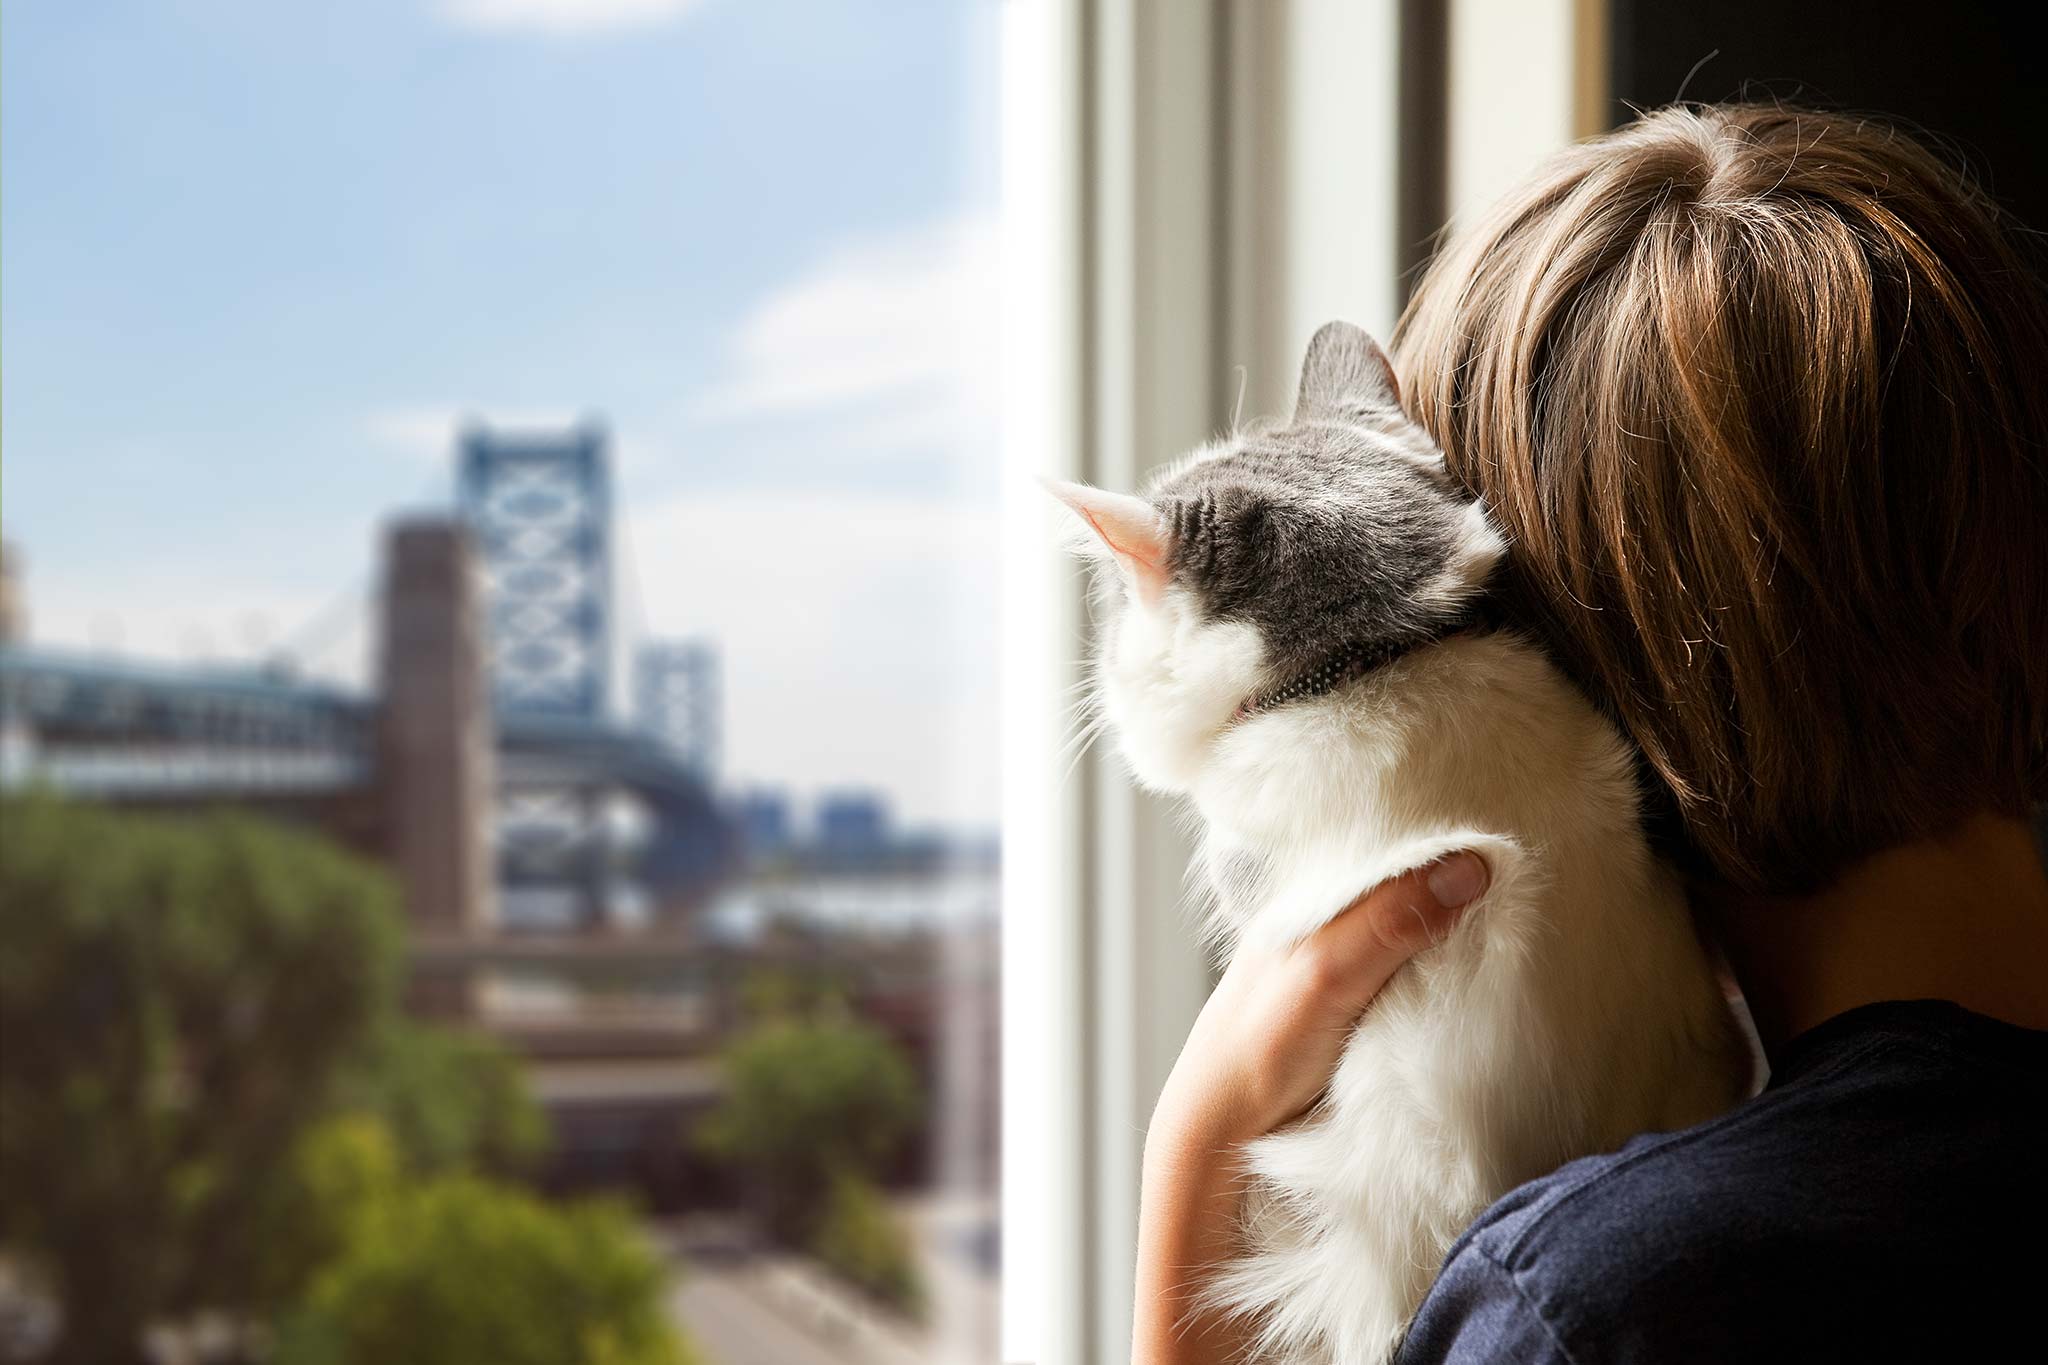 Woman With Cat Looking at Bridge